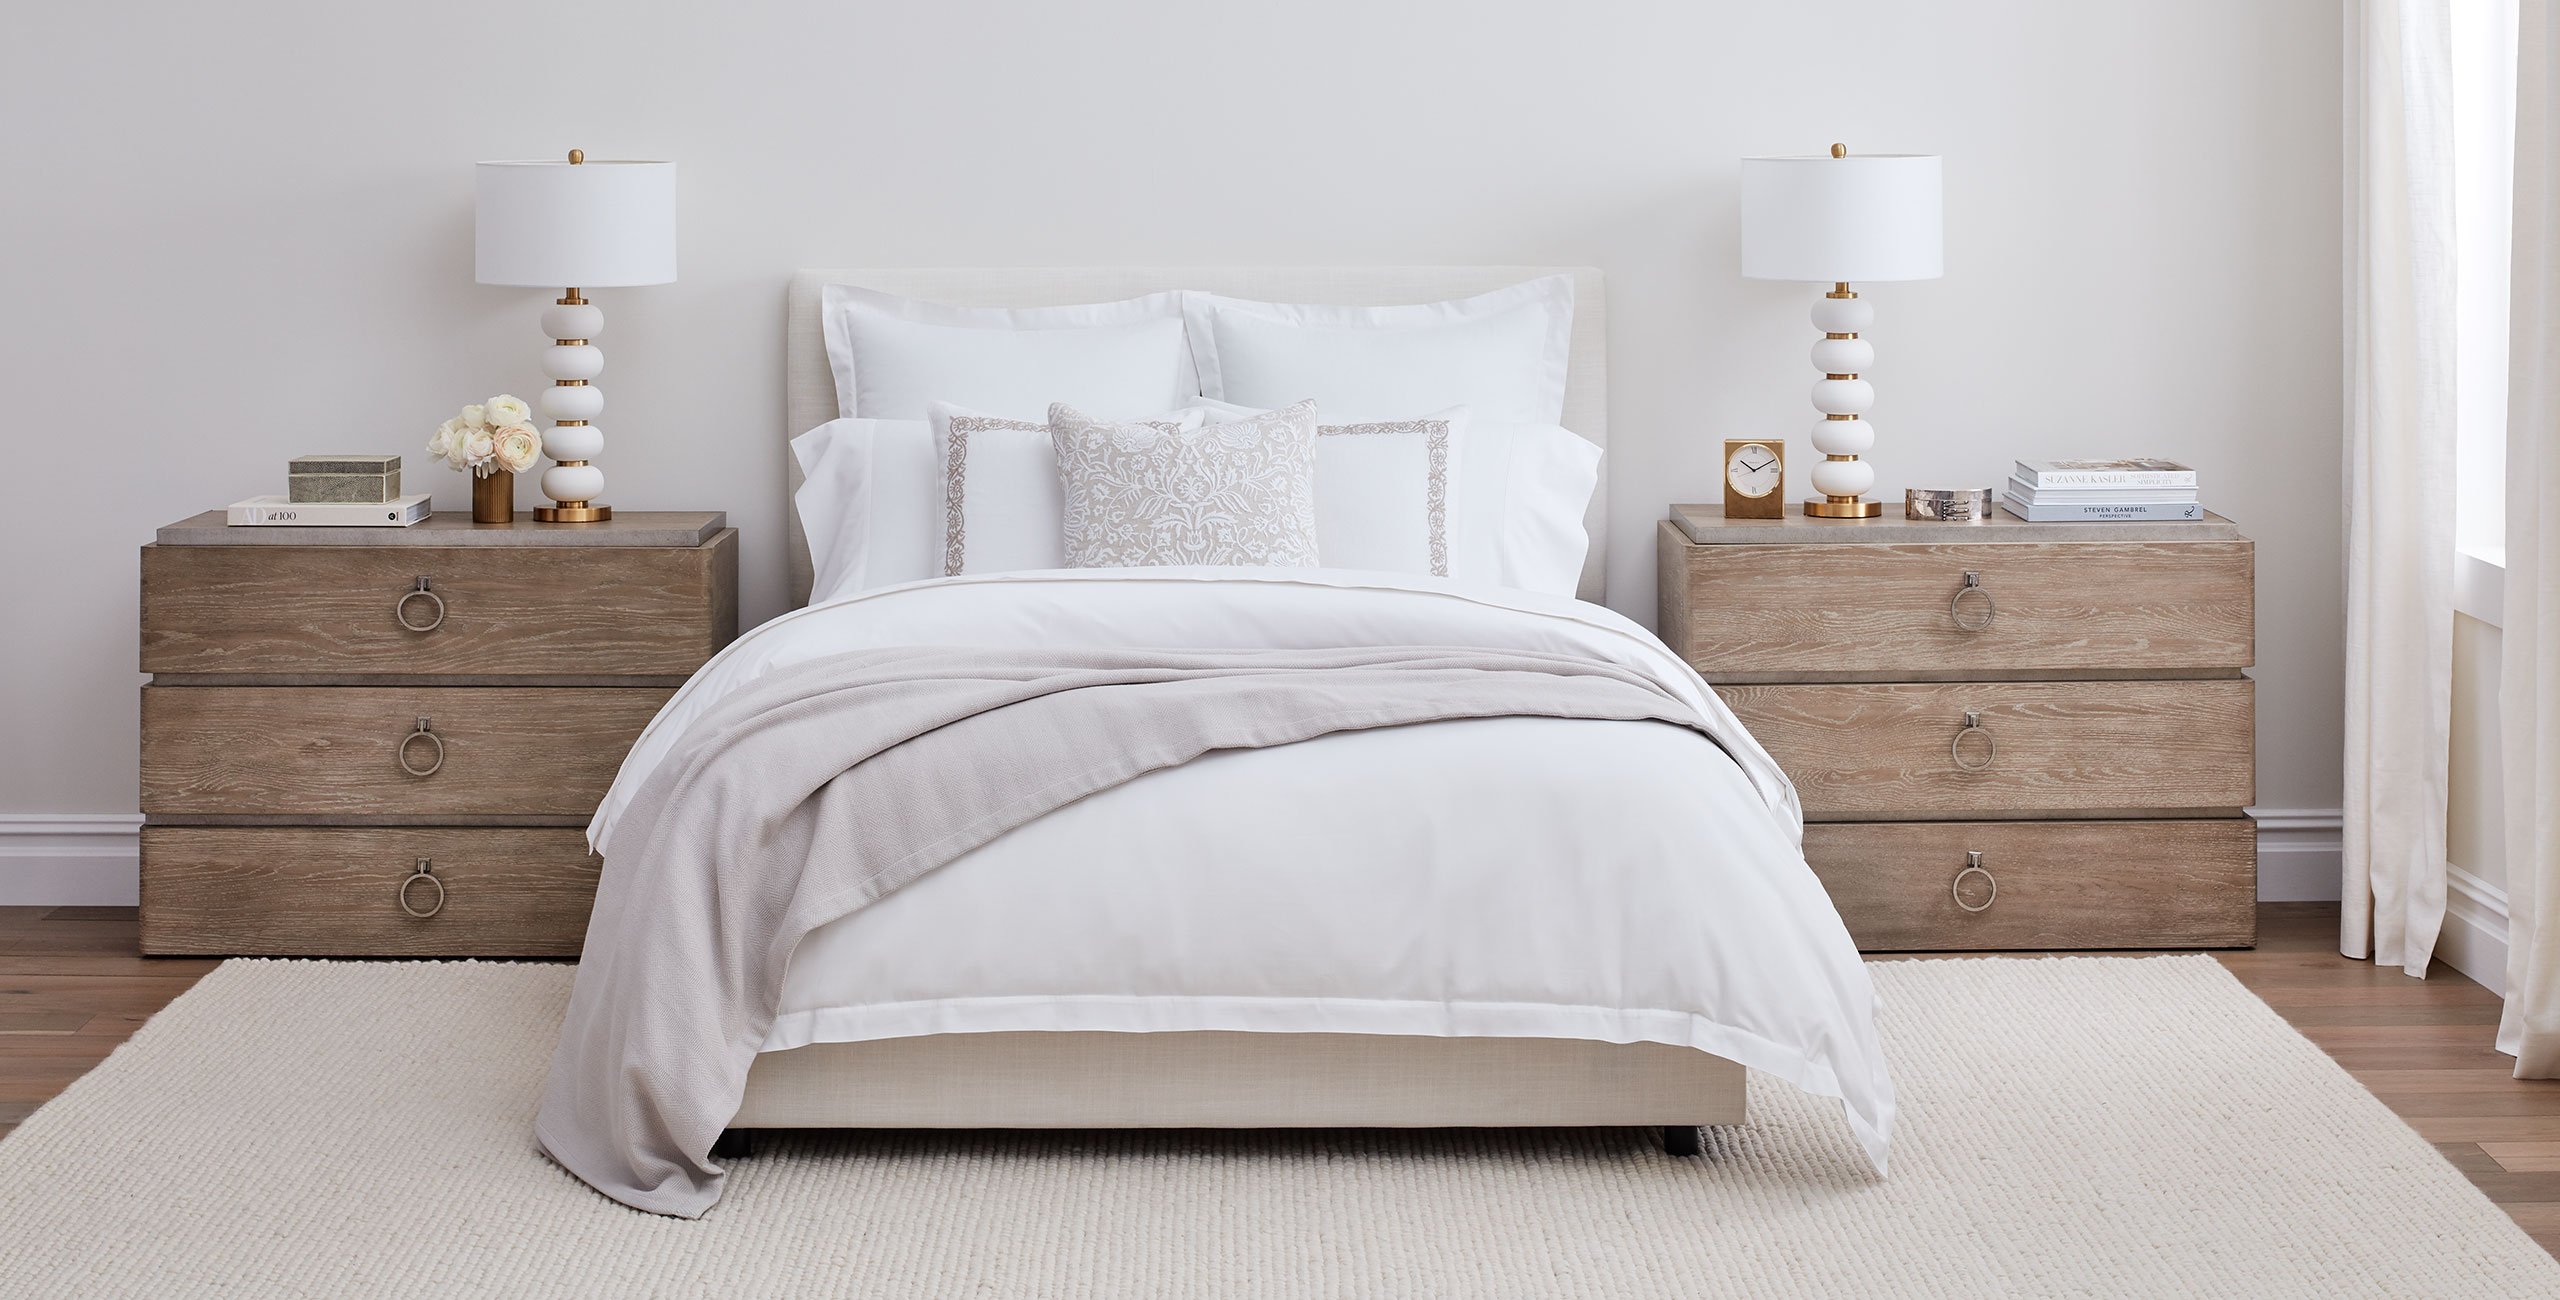 Flat vs Fitted Bed Sheets: Why You Need Both - Boll & Branch